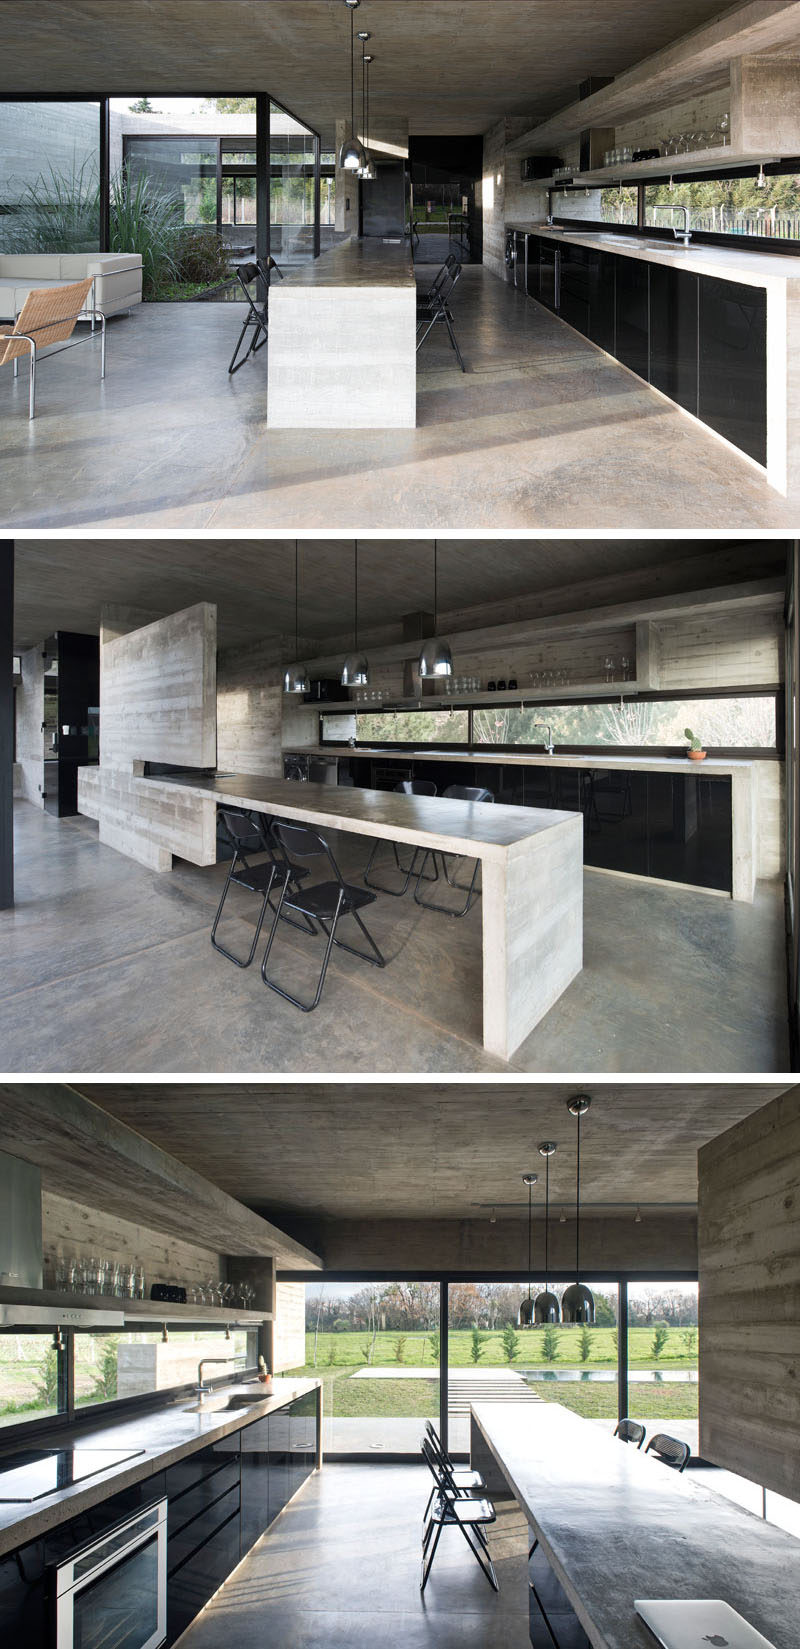 As concrete is the main material throughout this modern house, it has been used to create the concrete countertops, a large island a open shelving in the kitchen. Black cabinetry and dining chairs tie in with the black windows frames. #ConcreteKitchen #ConcreteCountertops #BlackCabinetry #KitchenDesign